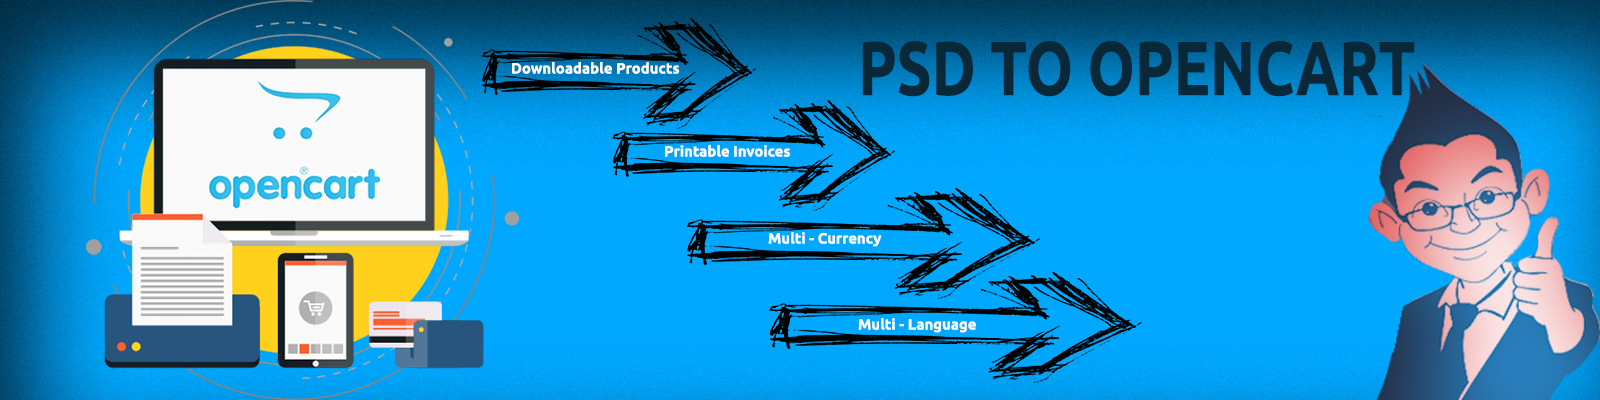 psd to opencart conversion services